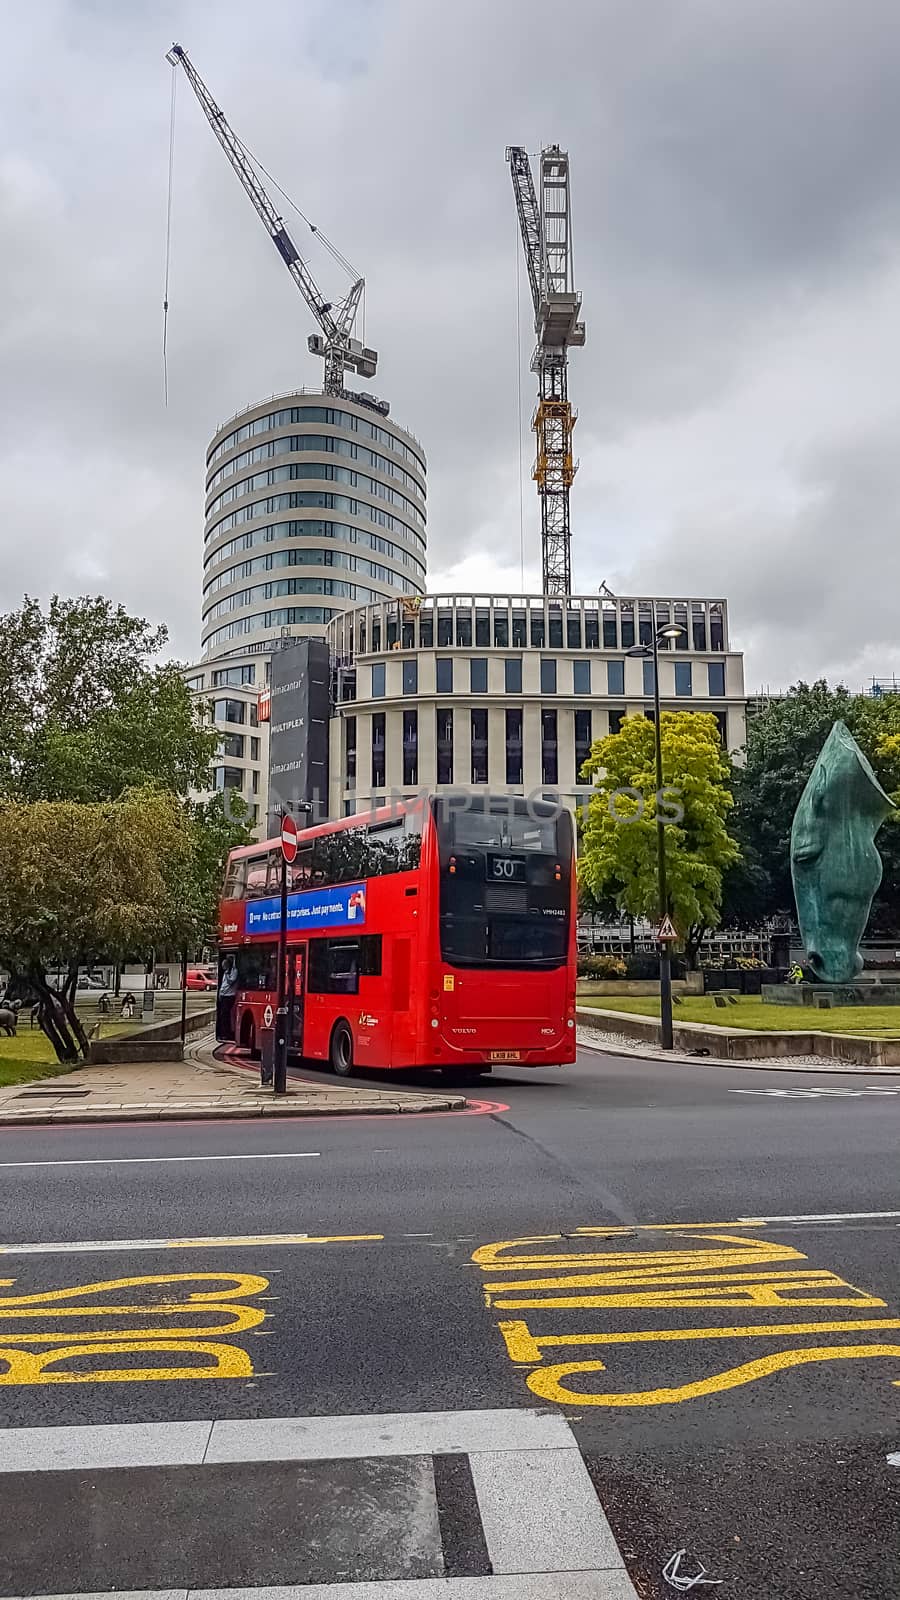 London, UK - July 8, 2020: Modern red double-decker bus waiting for people in central London by DamantisZ